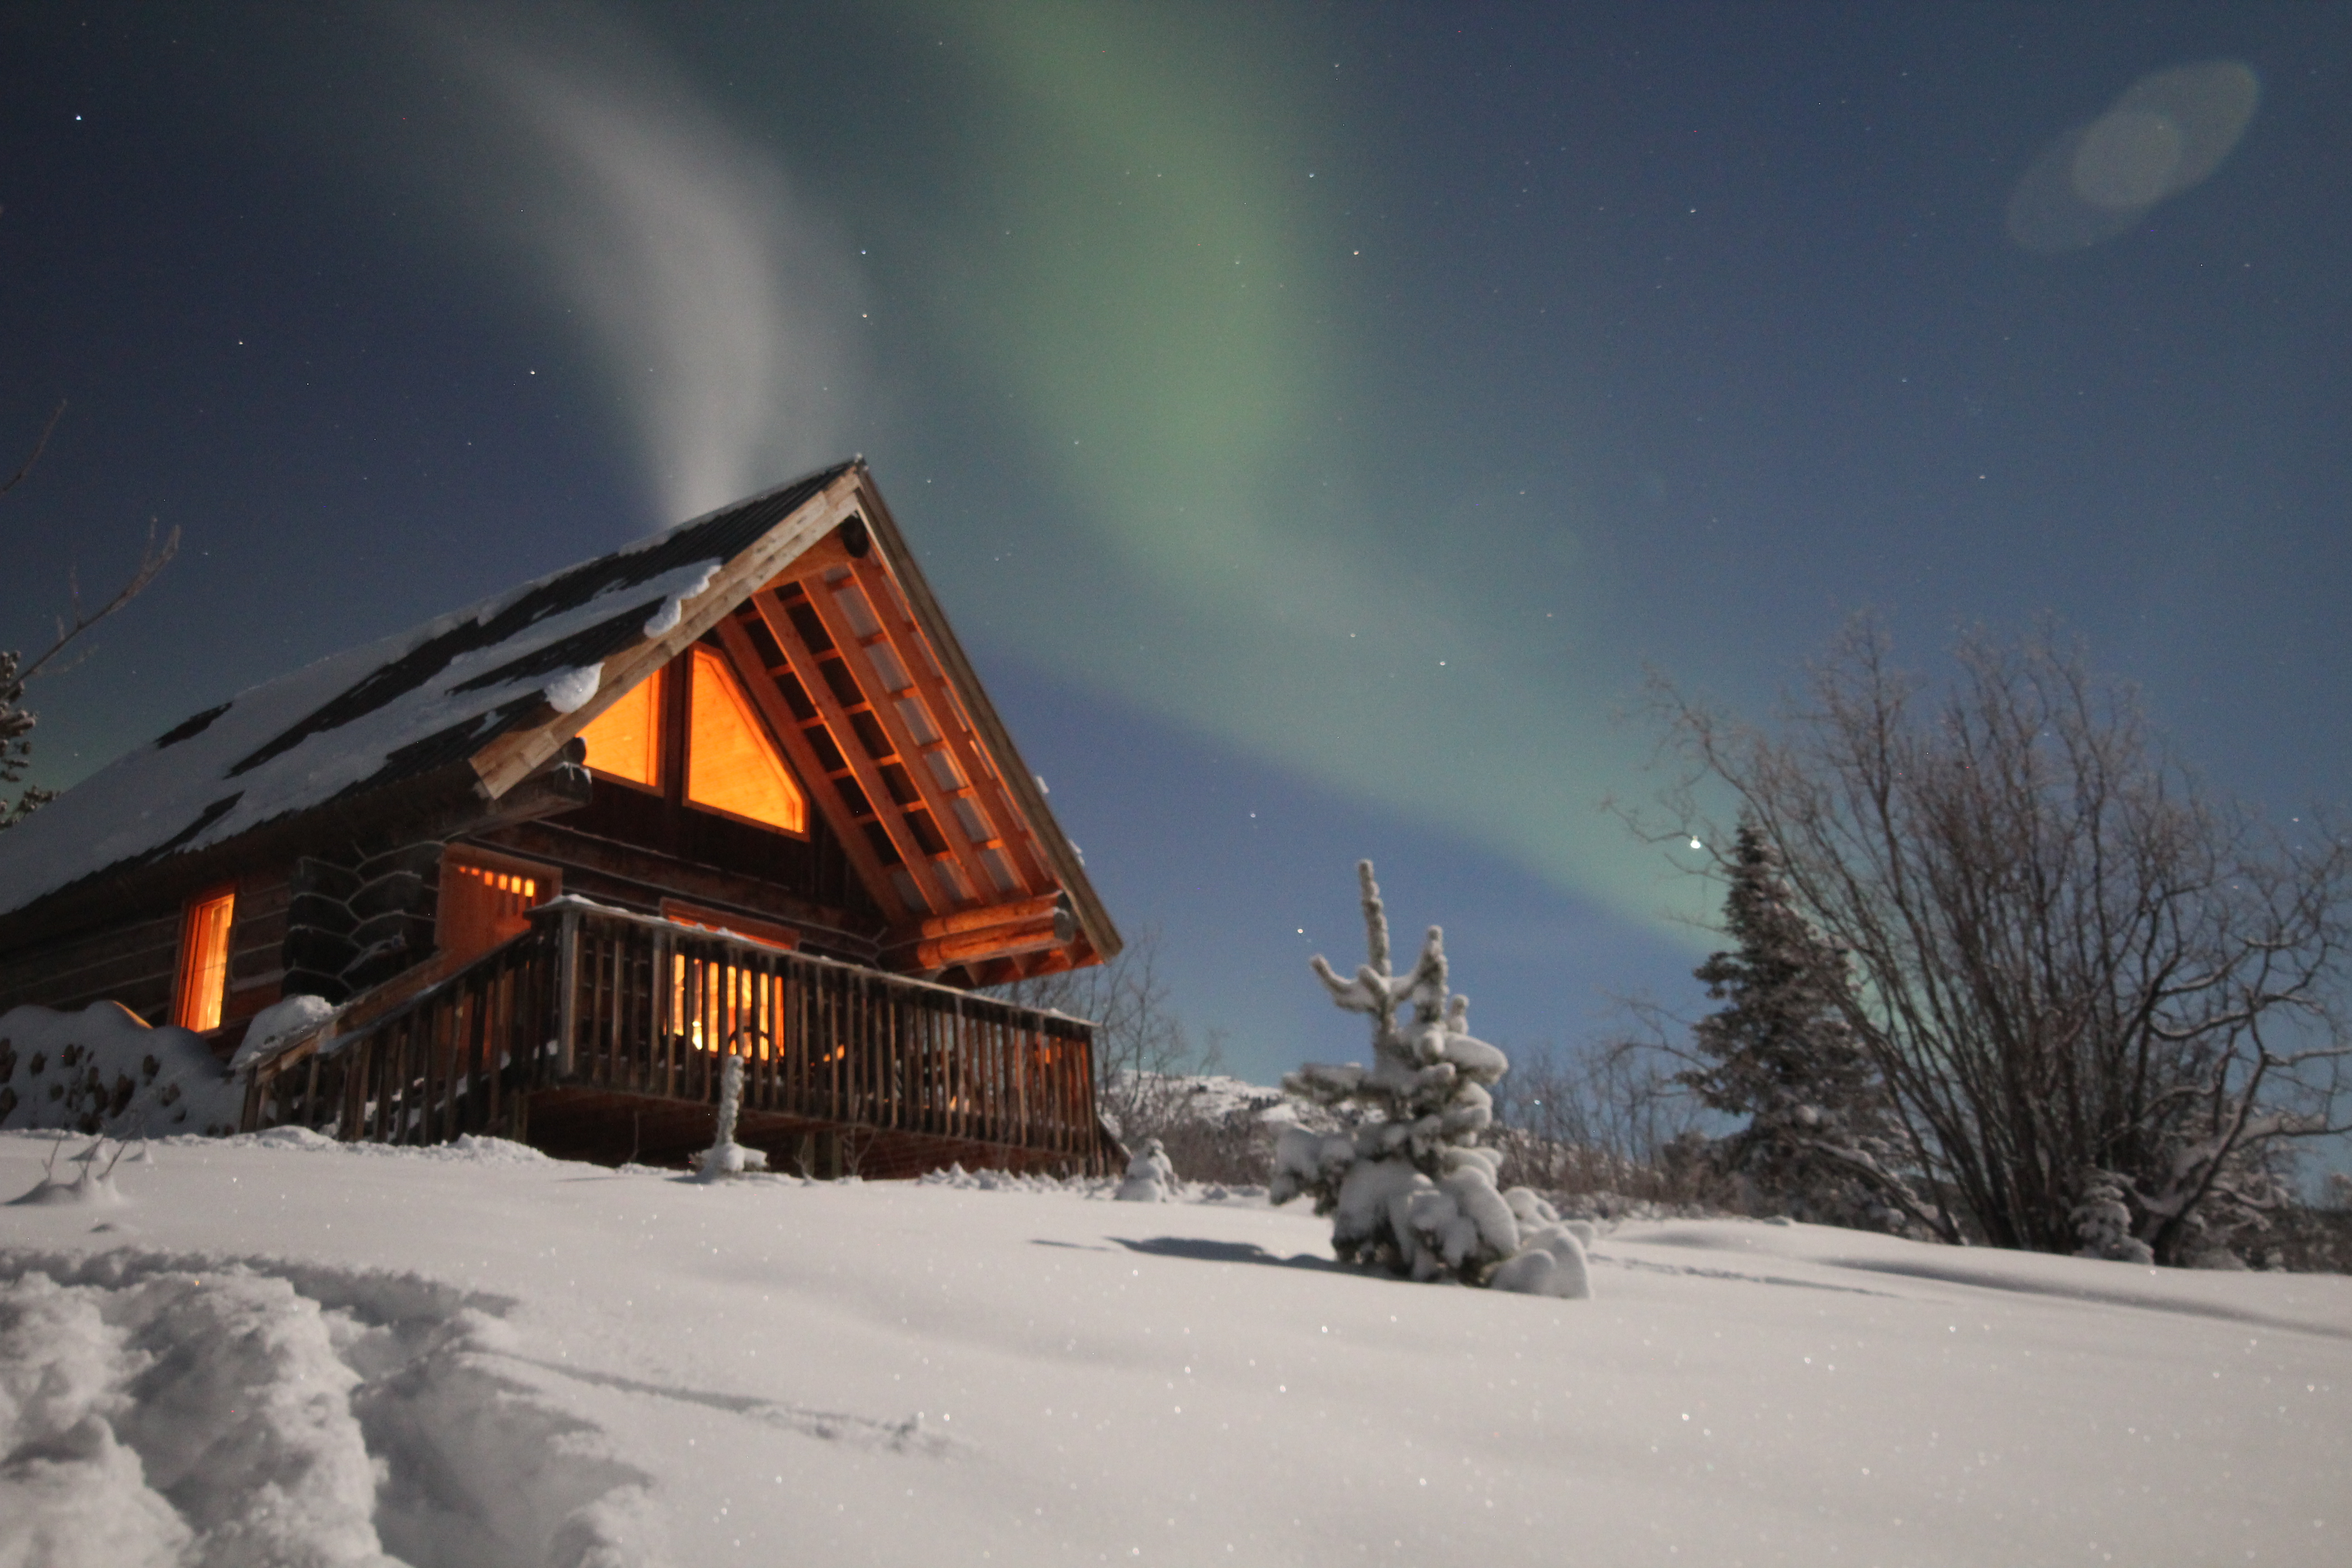 A cabin at nighttime with the northern lights in the sky